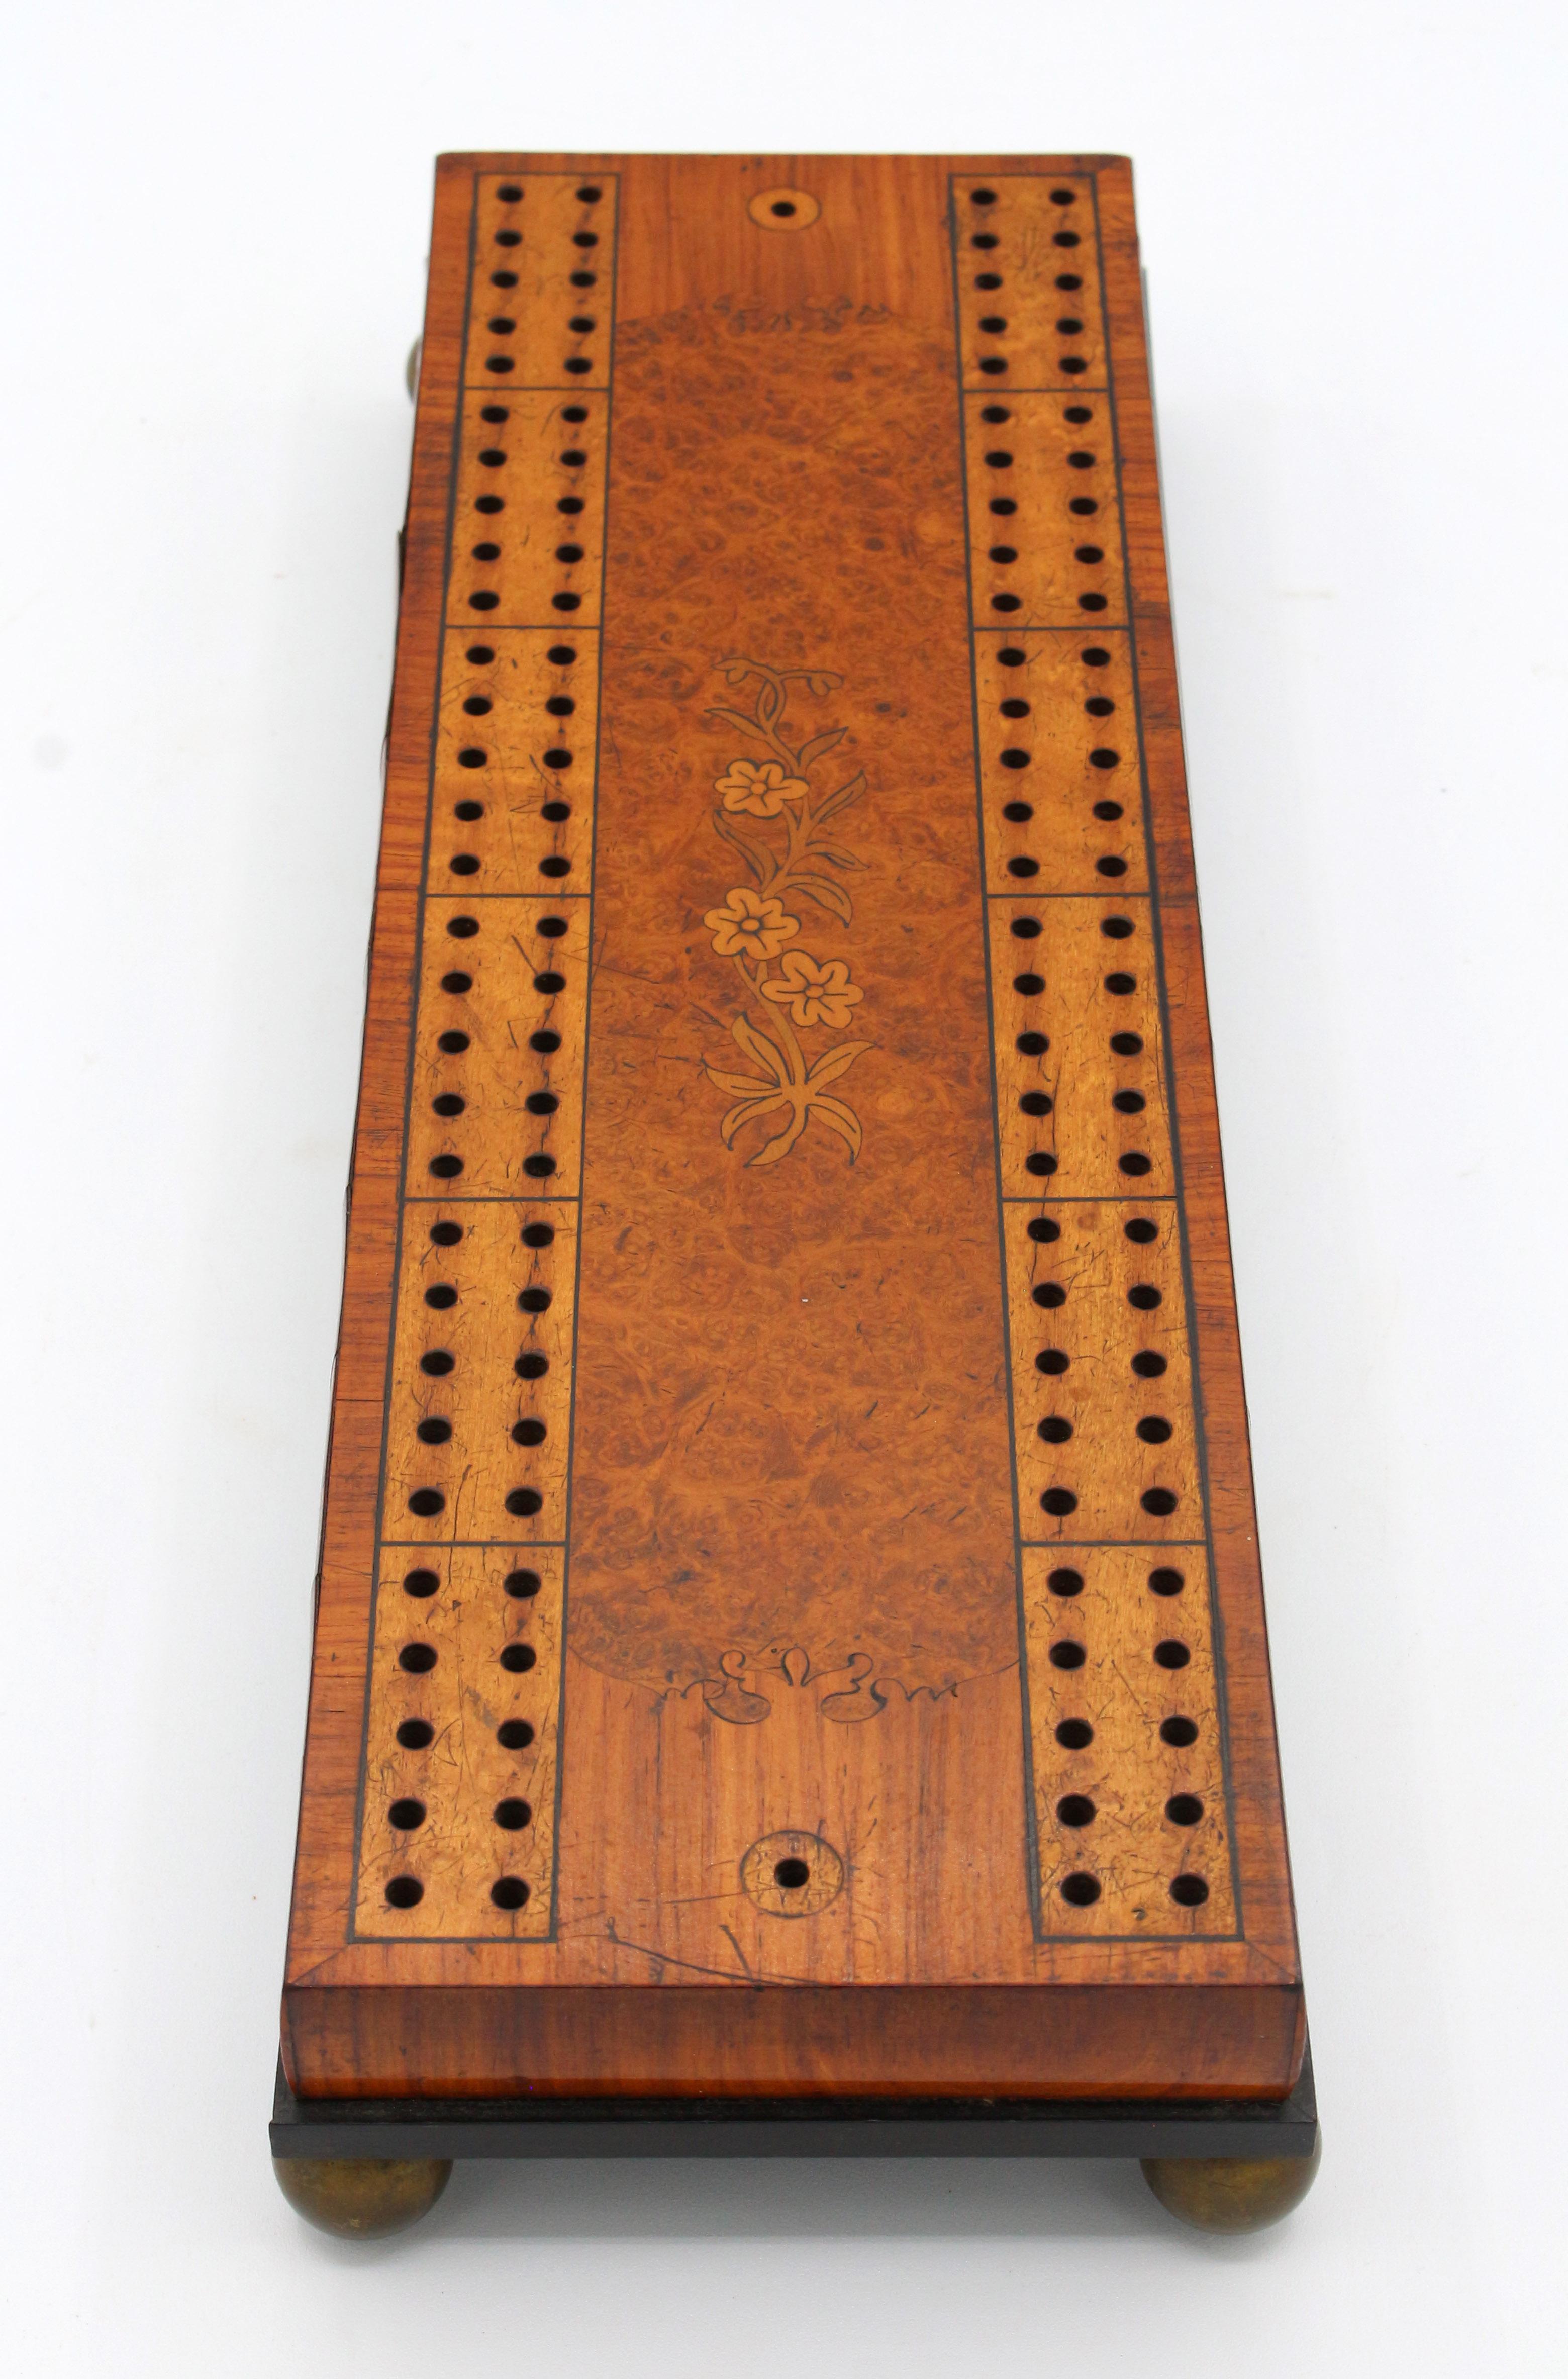 Circa 1860-80 marquetry inlaid cribbage board, English. Burl amboyna wood with walnut, satinwood, boxwood, kingwood & ebony raised on brass ball feet. As fine as they come! Pegs are replacements of turned wood.
12 5/8